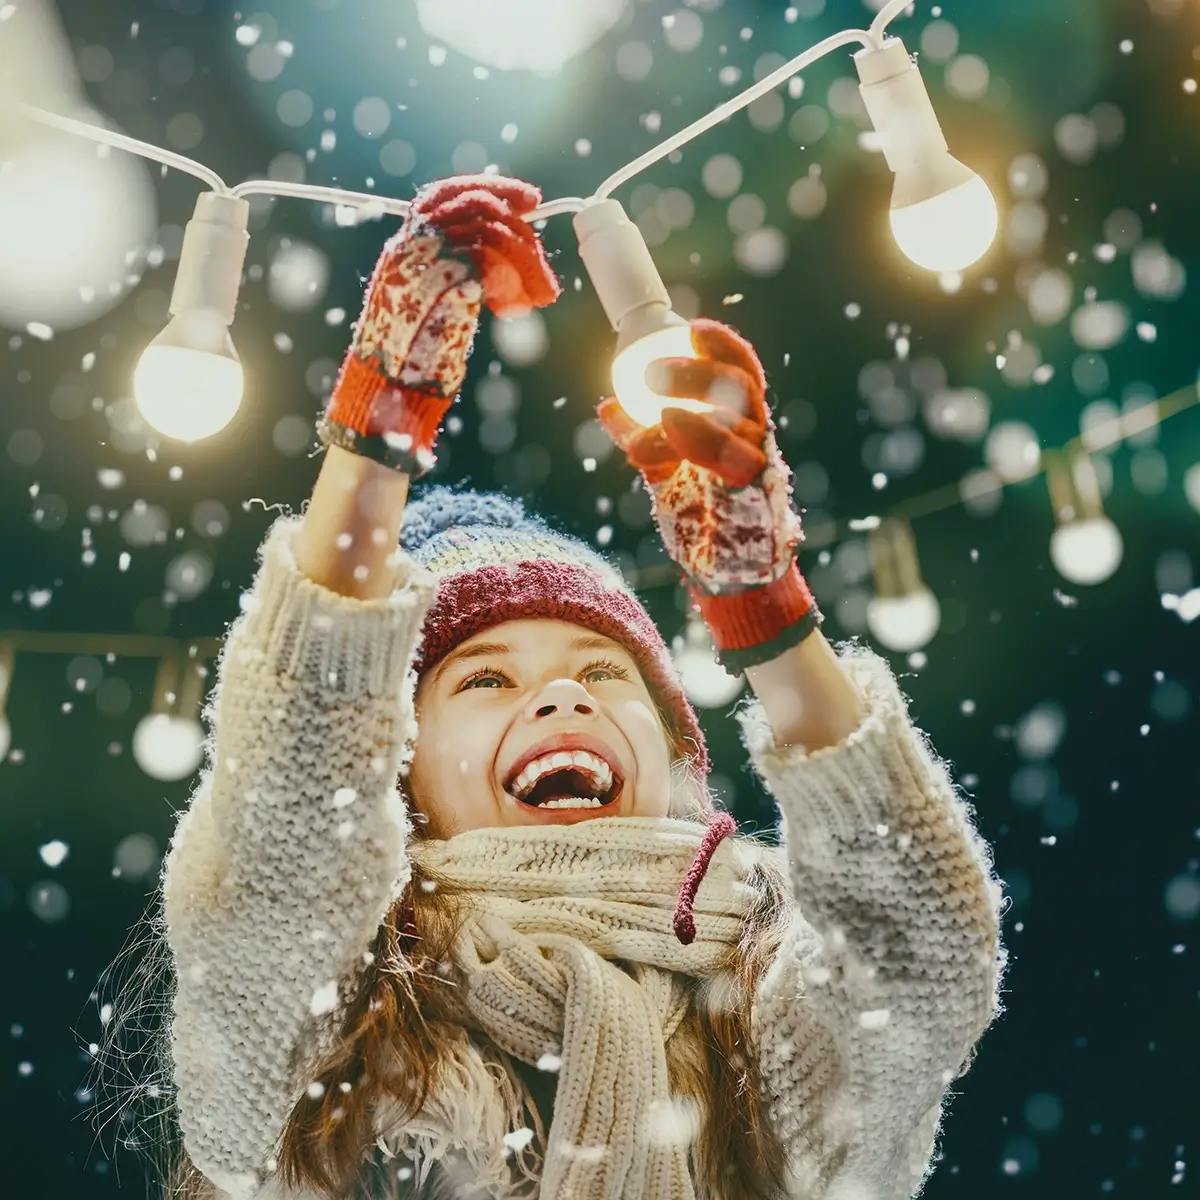 Woman outdoors in snow hanging lights, wearing a wool hat, sweater, and mittens.